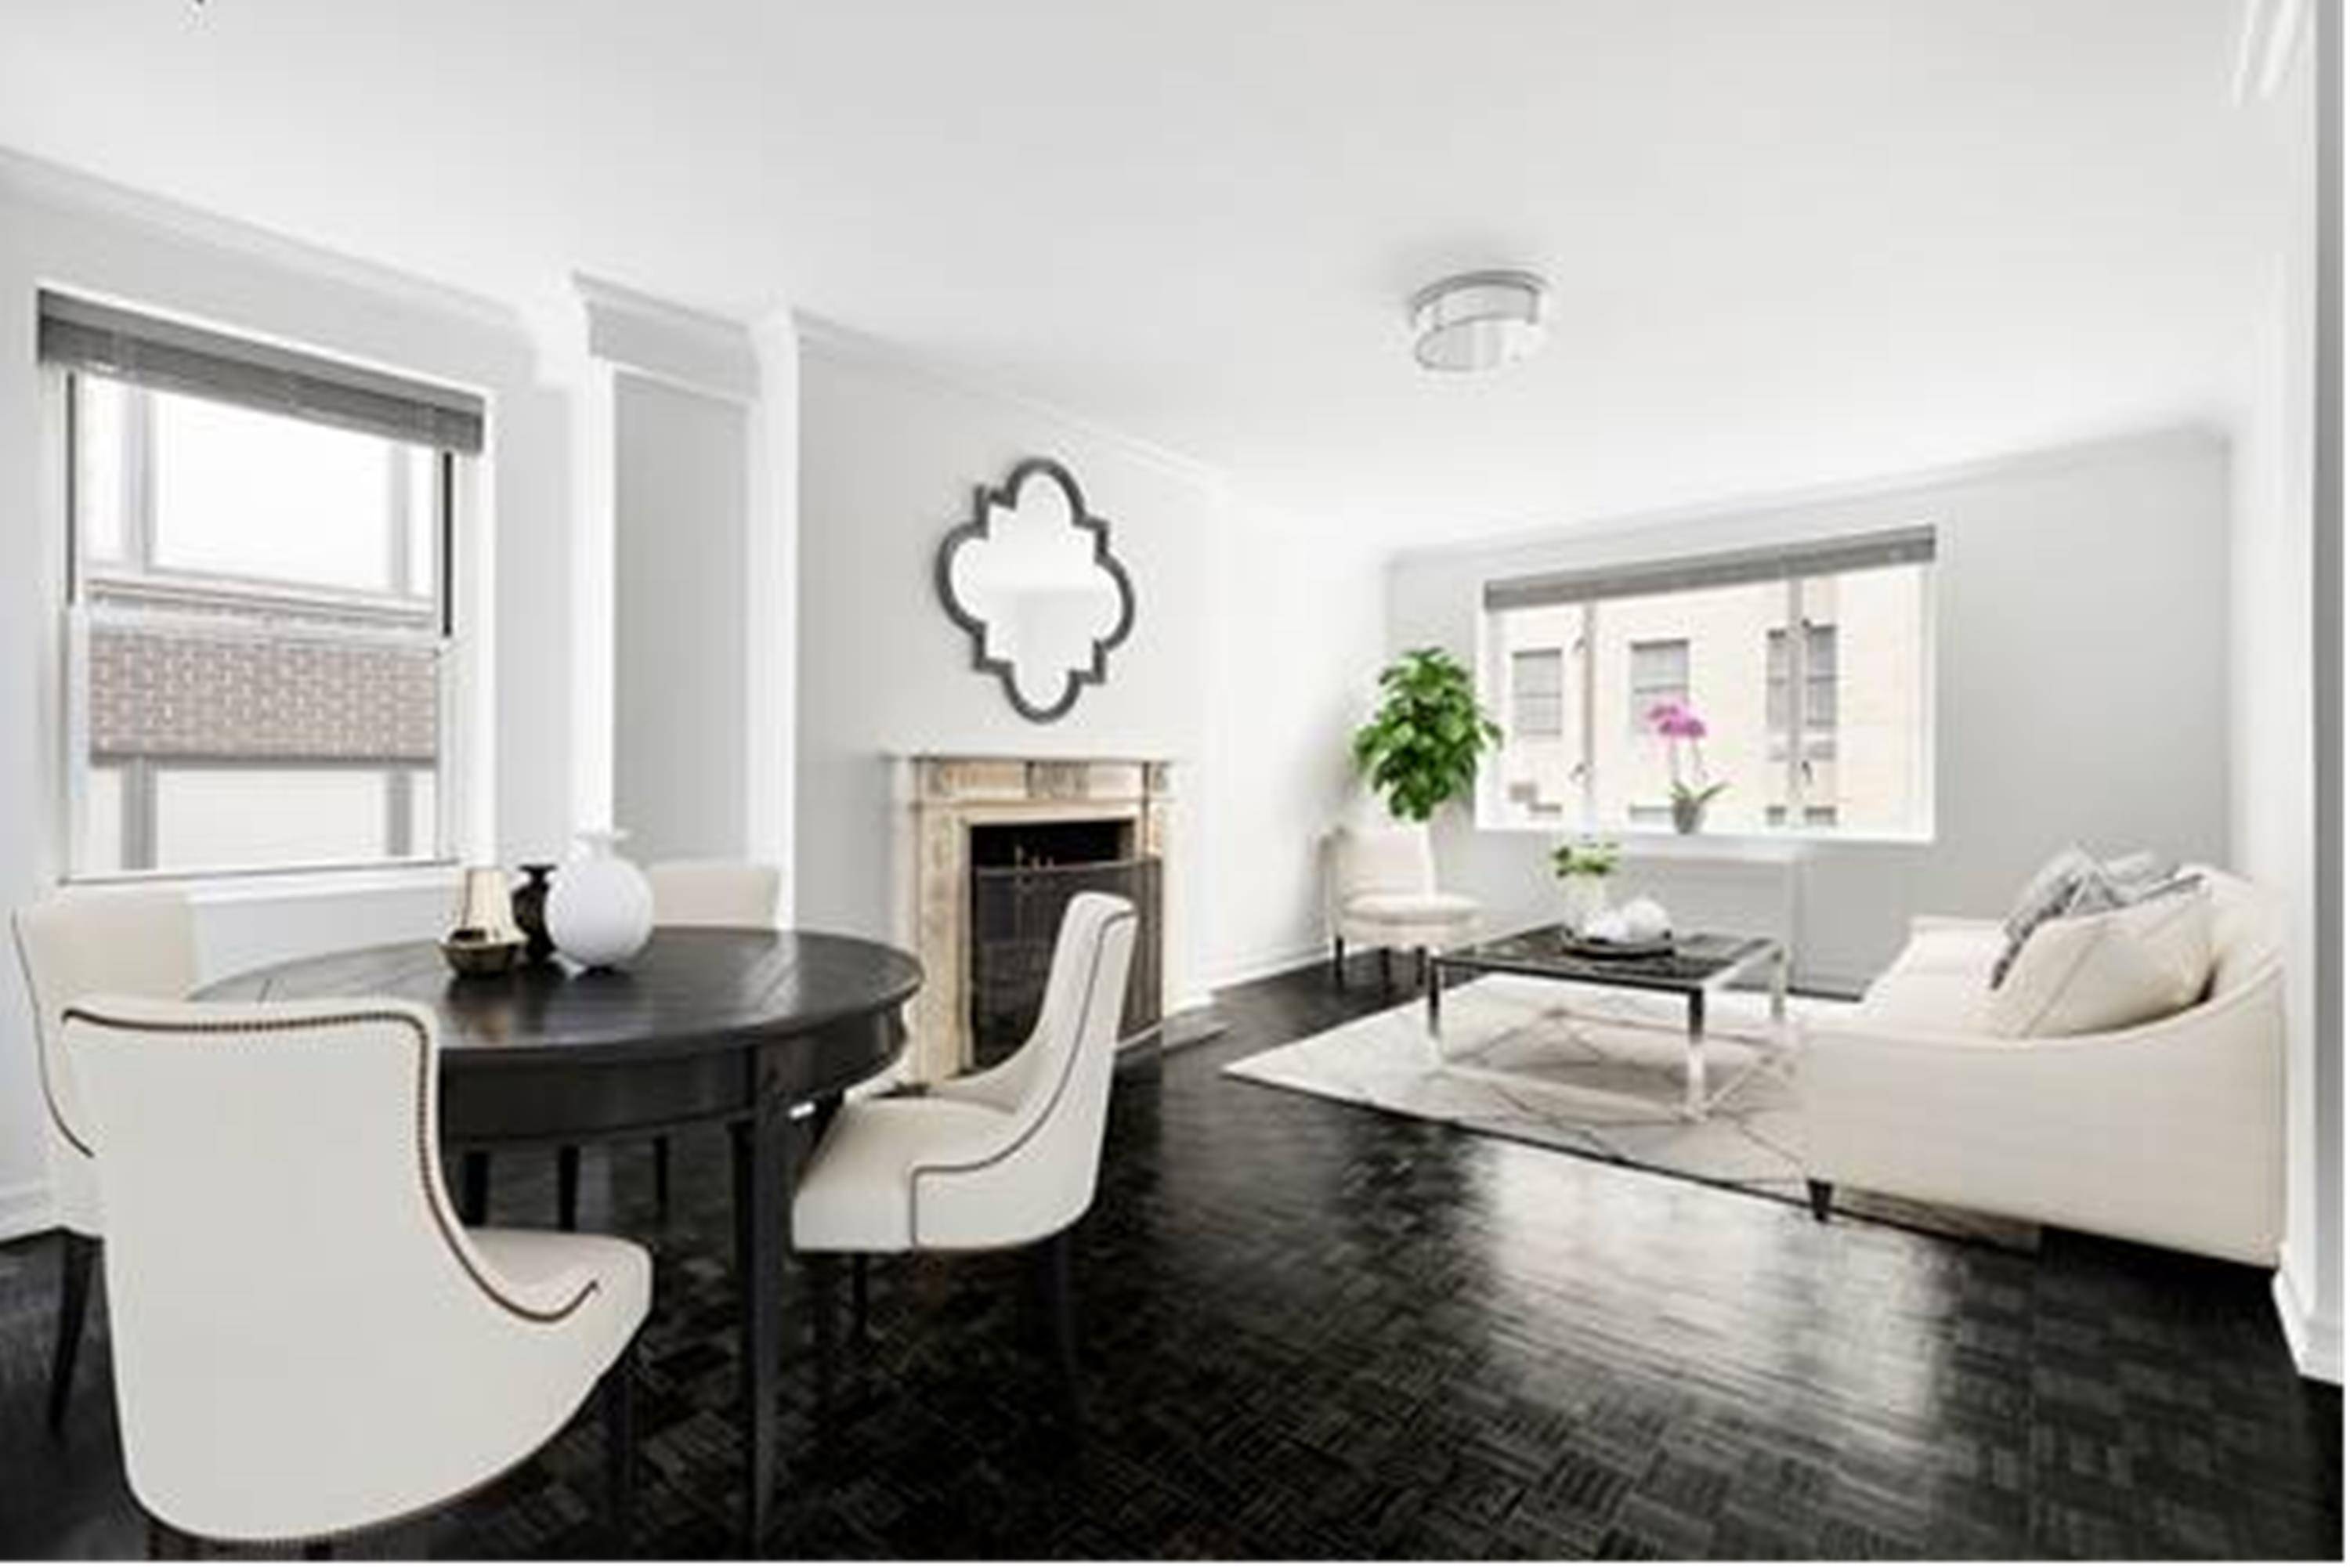 Best Value on Park Avenue This renovated, south facing one bedroom apartment, located on Park Avenue between 58th and 57th Street, has a bright and spacious living room with decorative ...